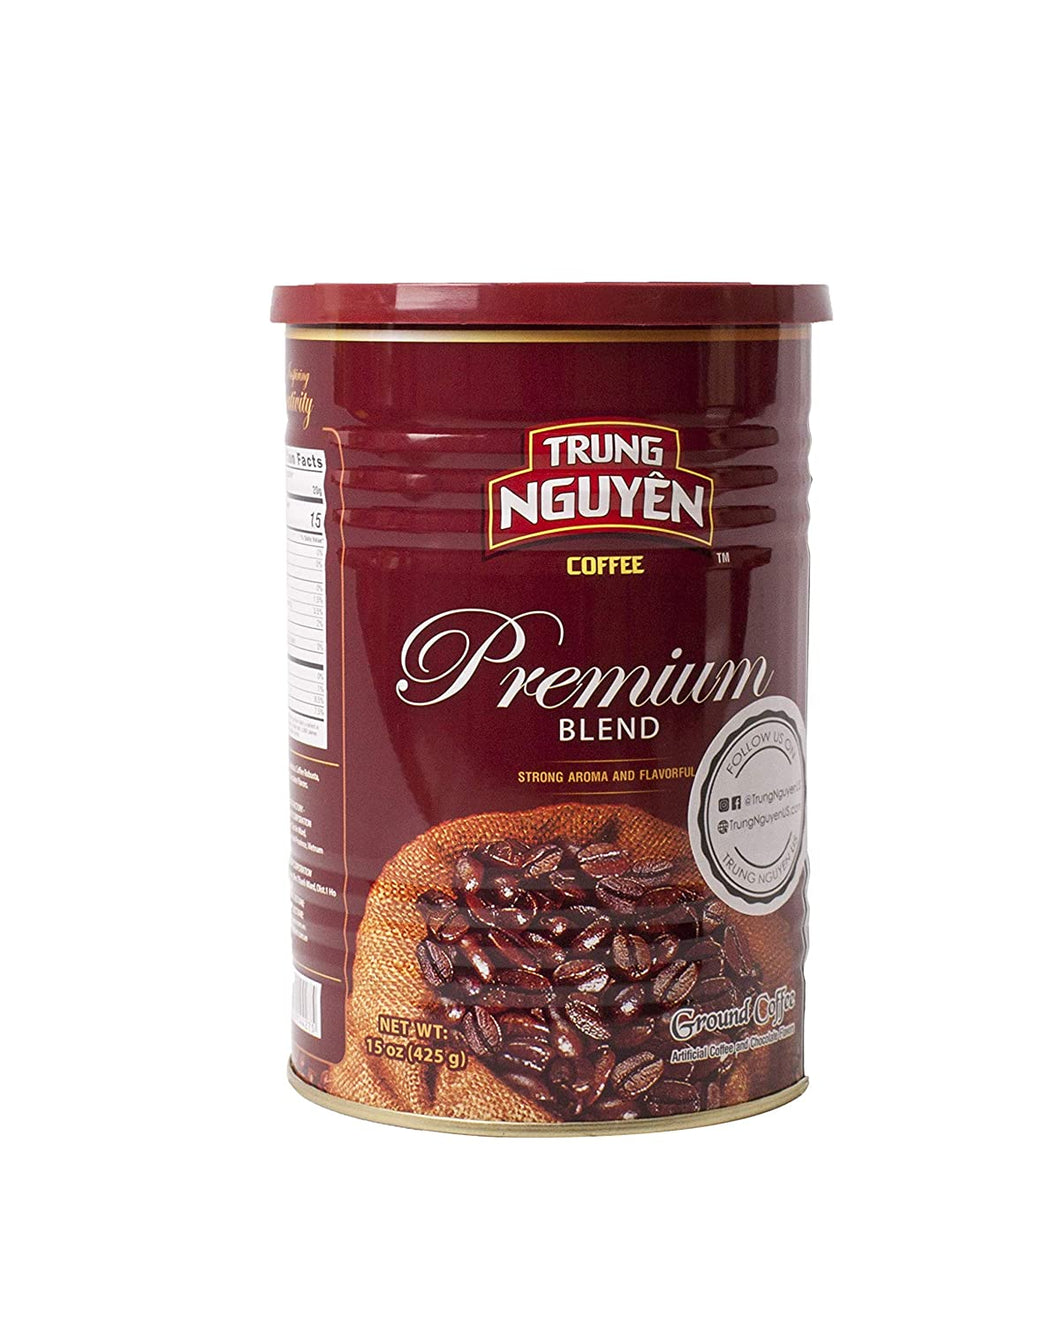 Trung Nguyen Coffee in Can- Premium Blend